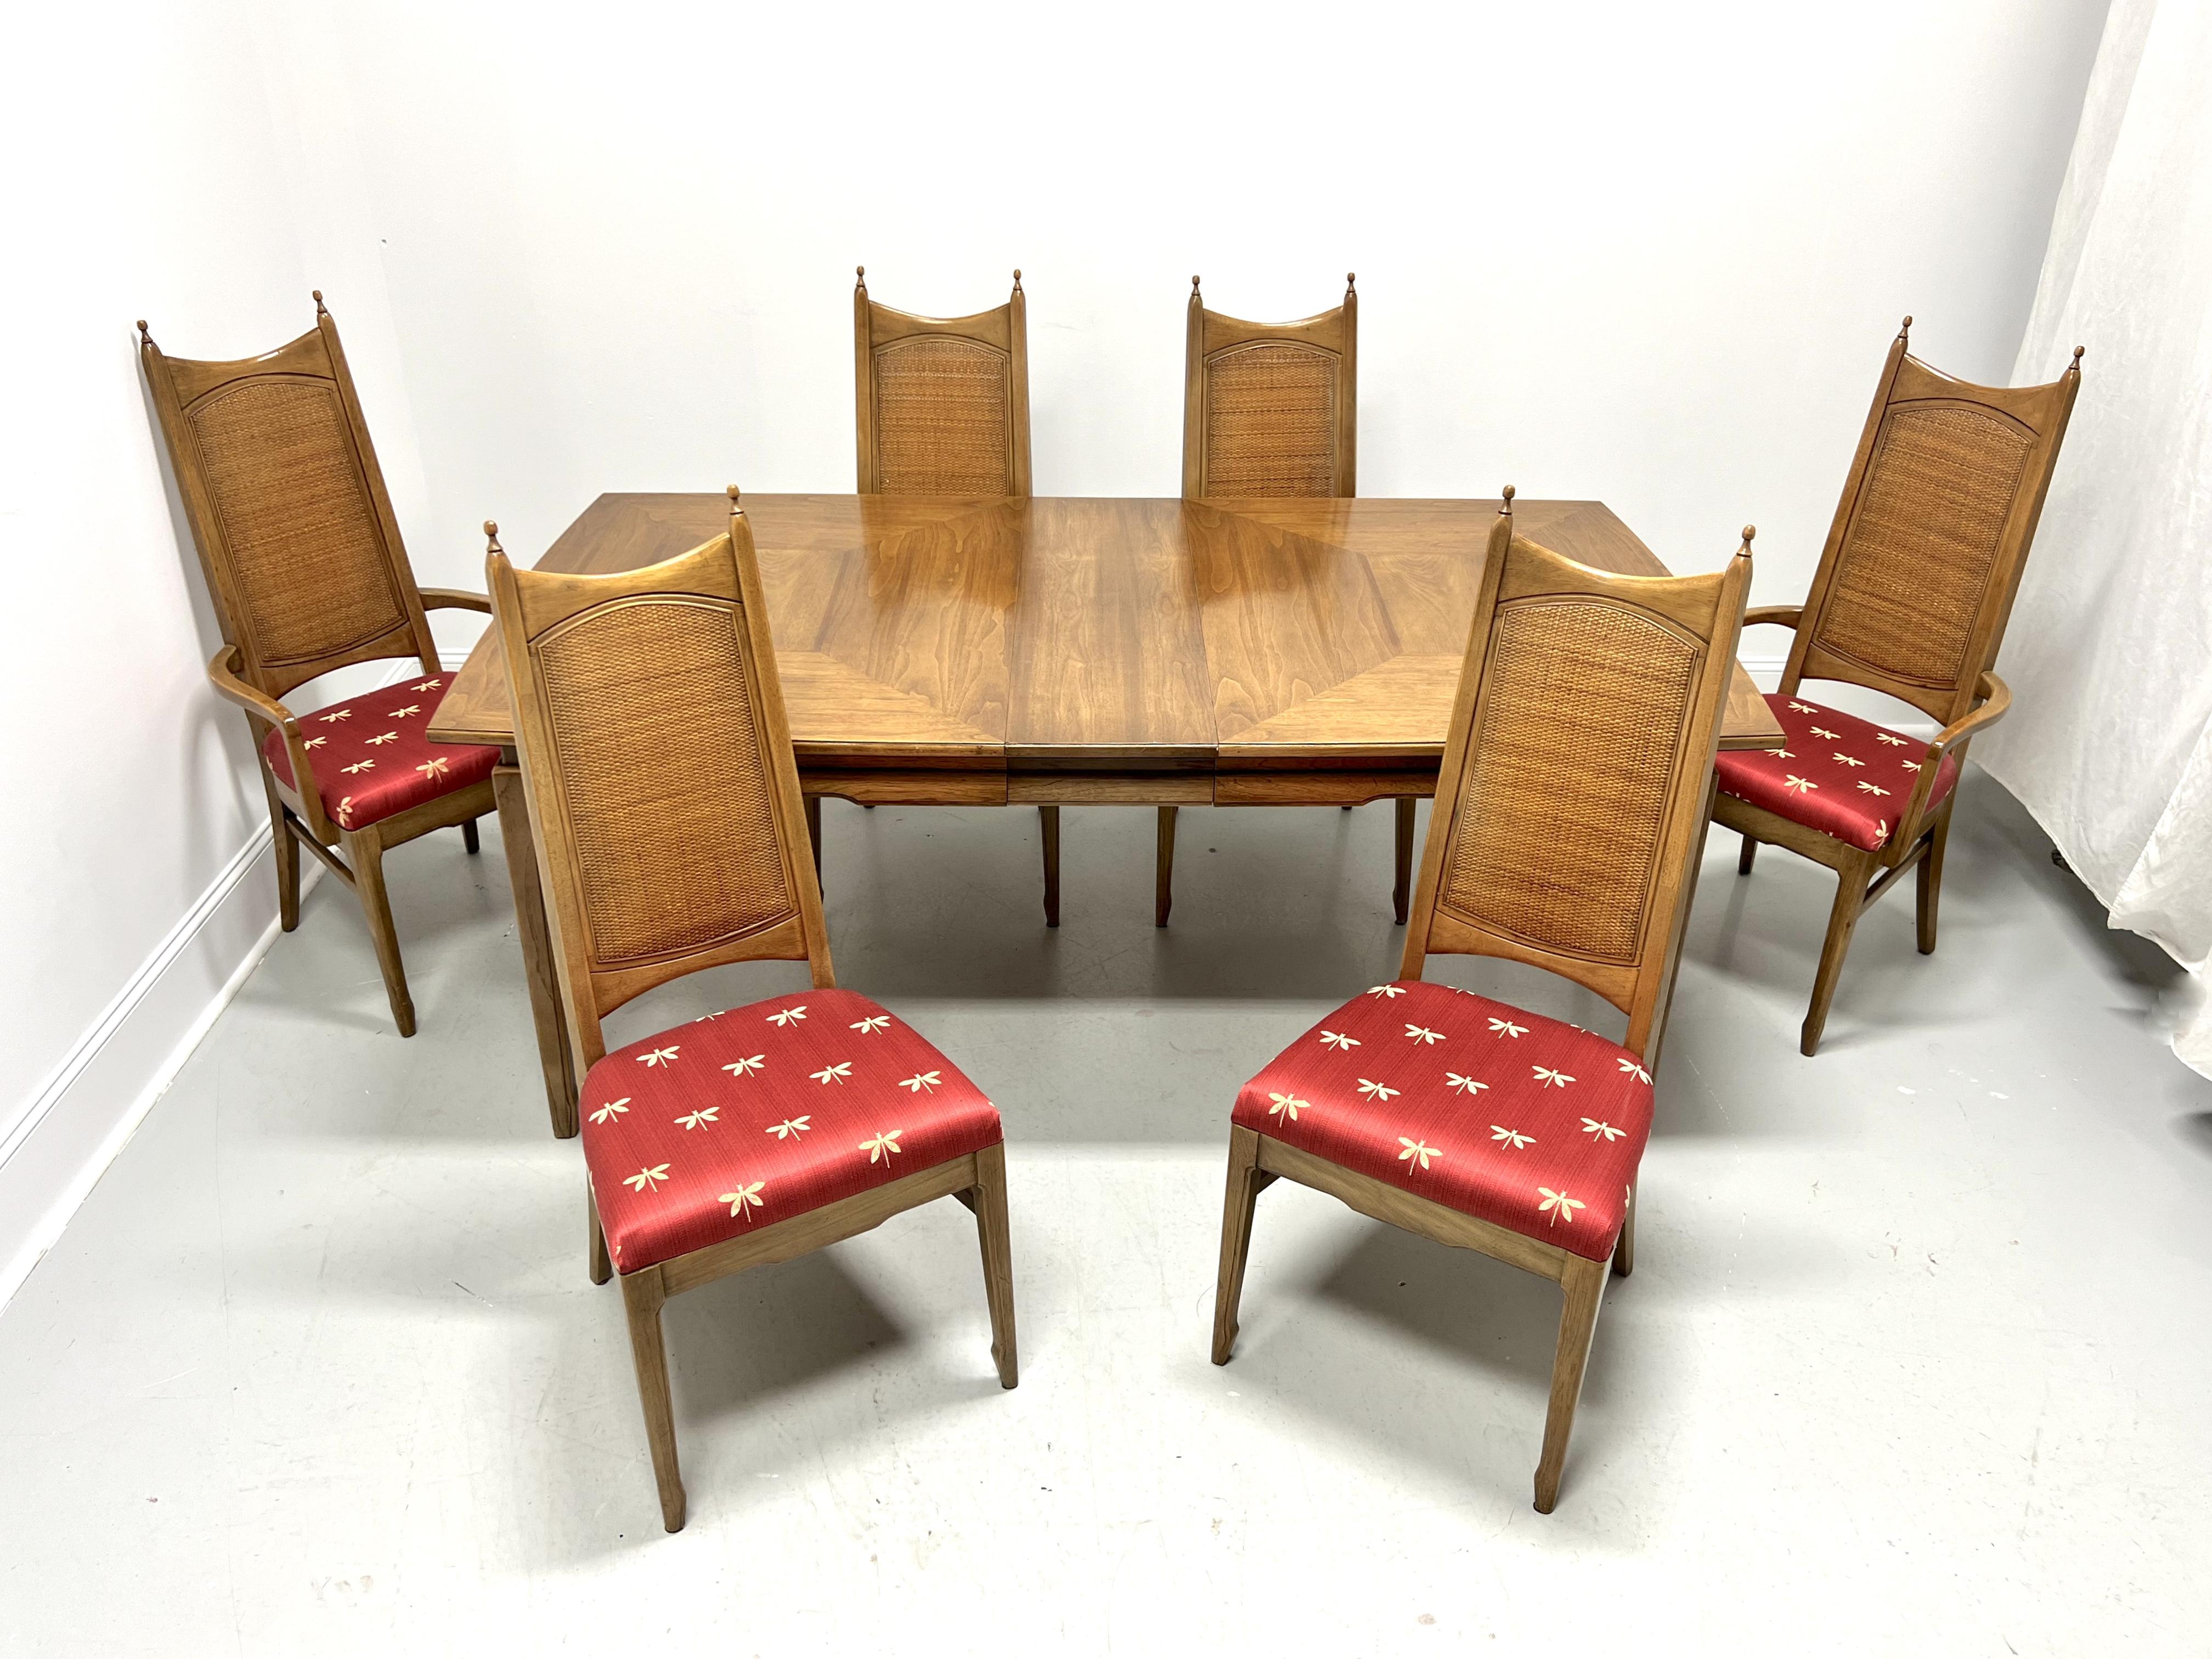 THOMASVILLE Pecan Mid 20th Century Modern MCM Dining Table Set with 6 Chairs For Sale 8